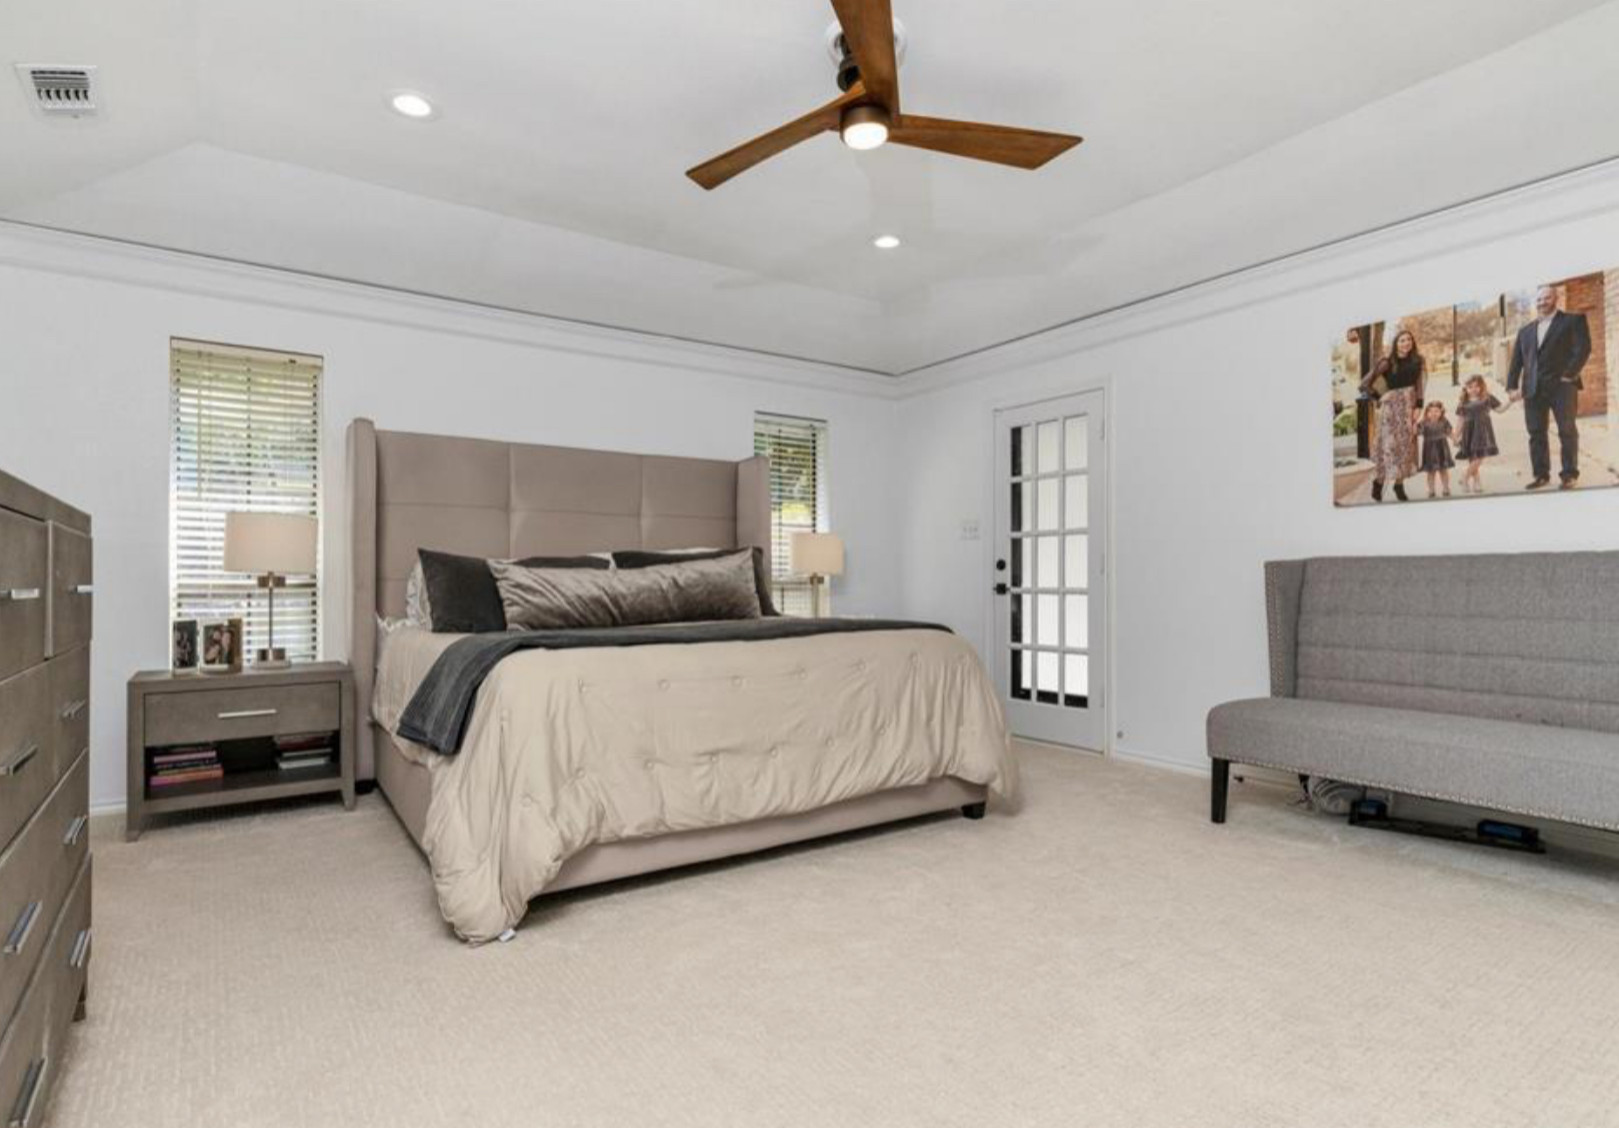 Bedroom - contemporary master carpeted bedroom idea in Dallas with white walls